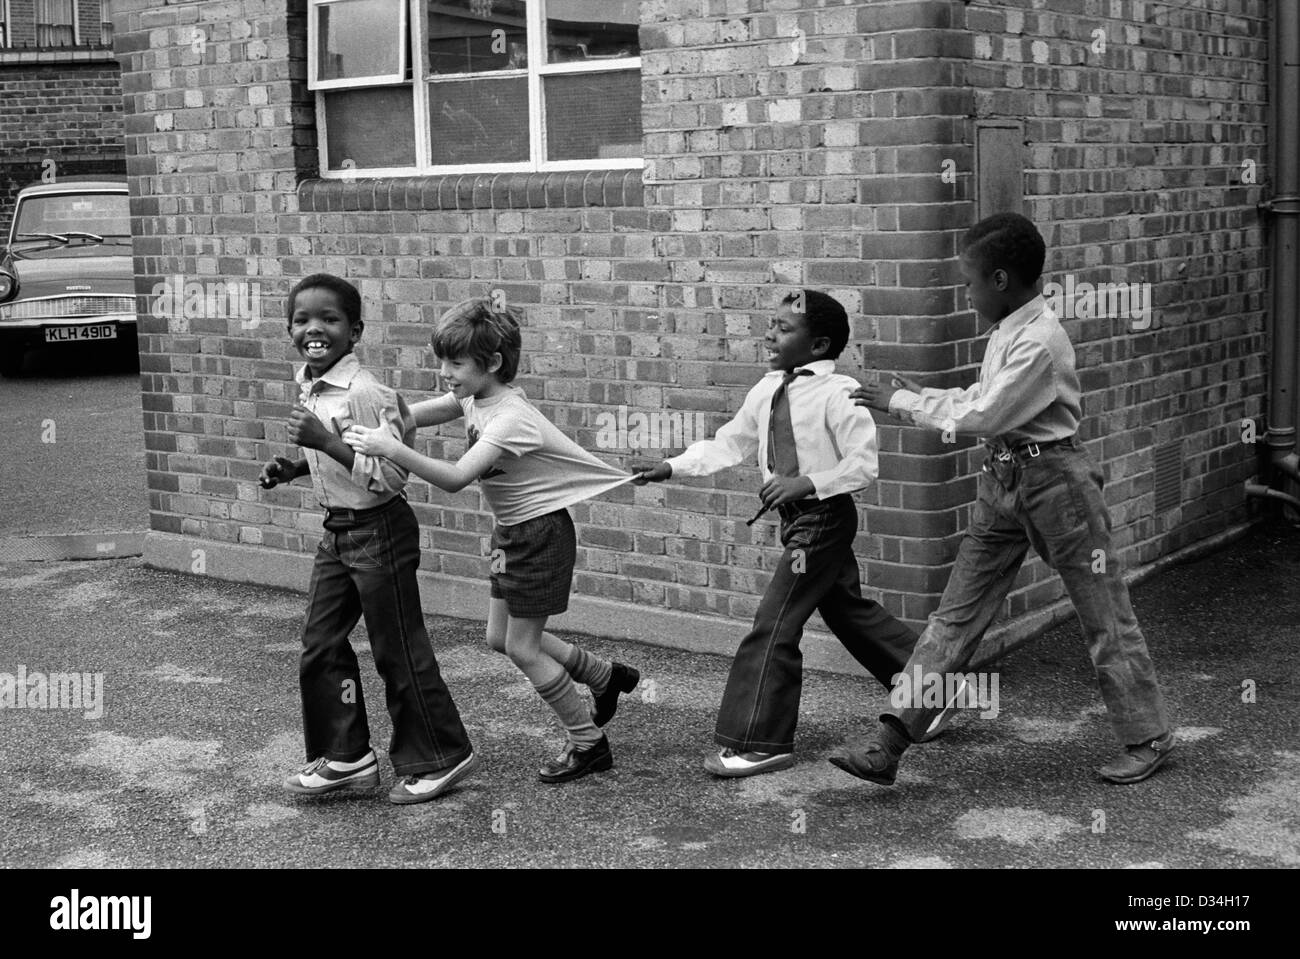 Primary school playground. Boys playing together. South London. 1970s   Multiracial multi ethnic black and white children having fun play time at school 70s UK HOMER SYKES Stock Photo